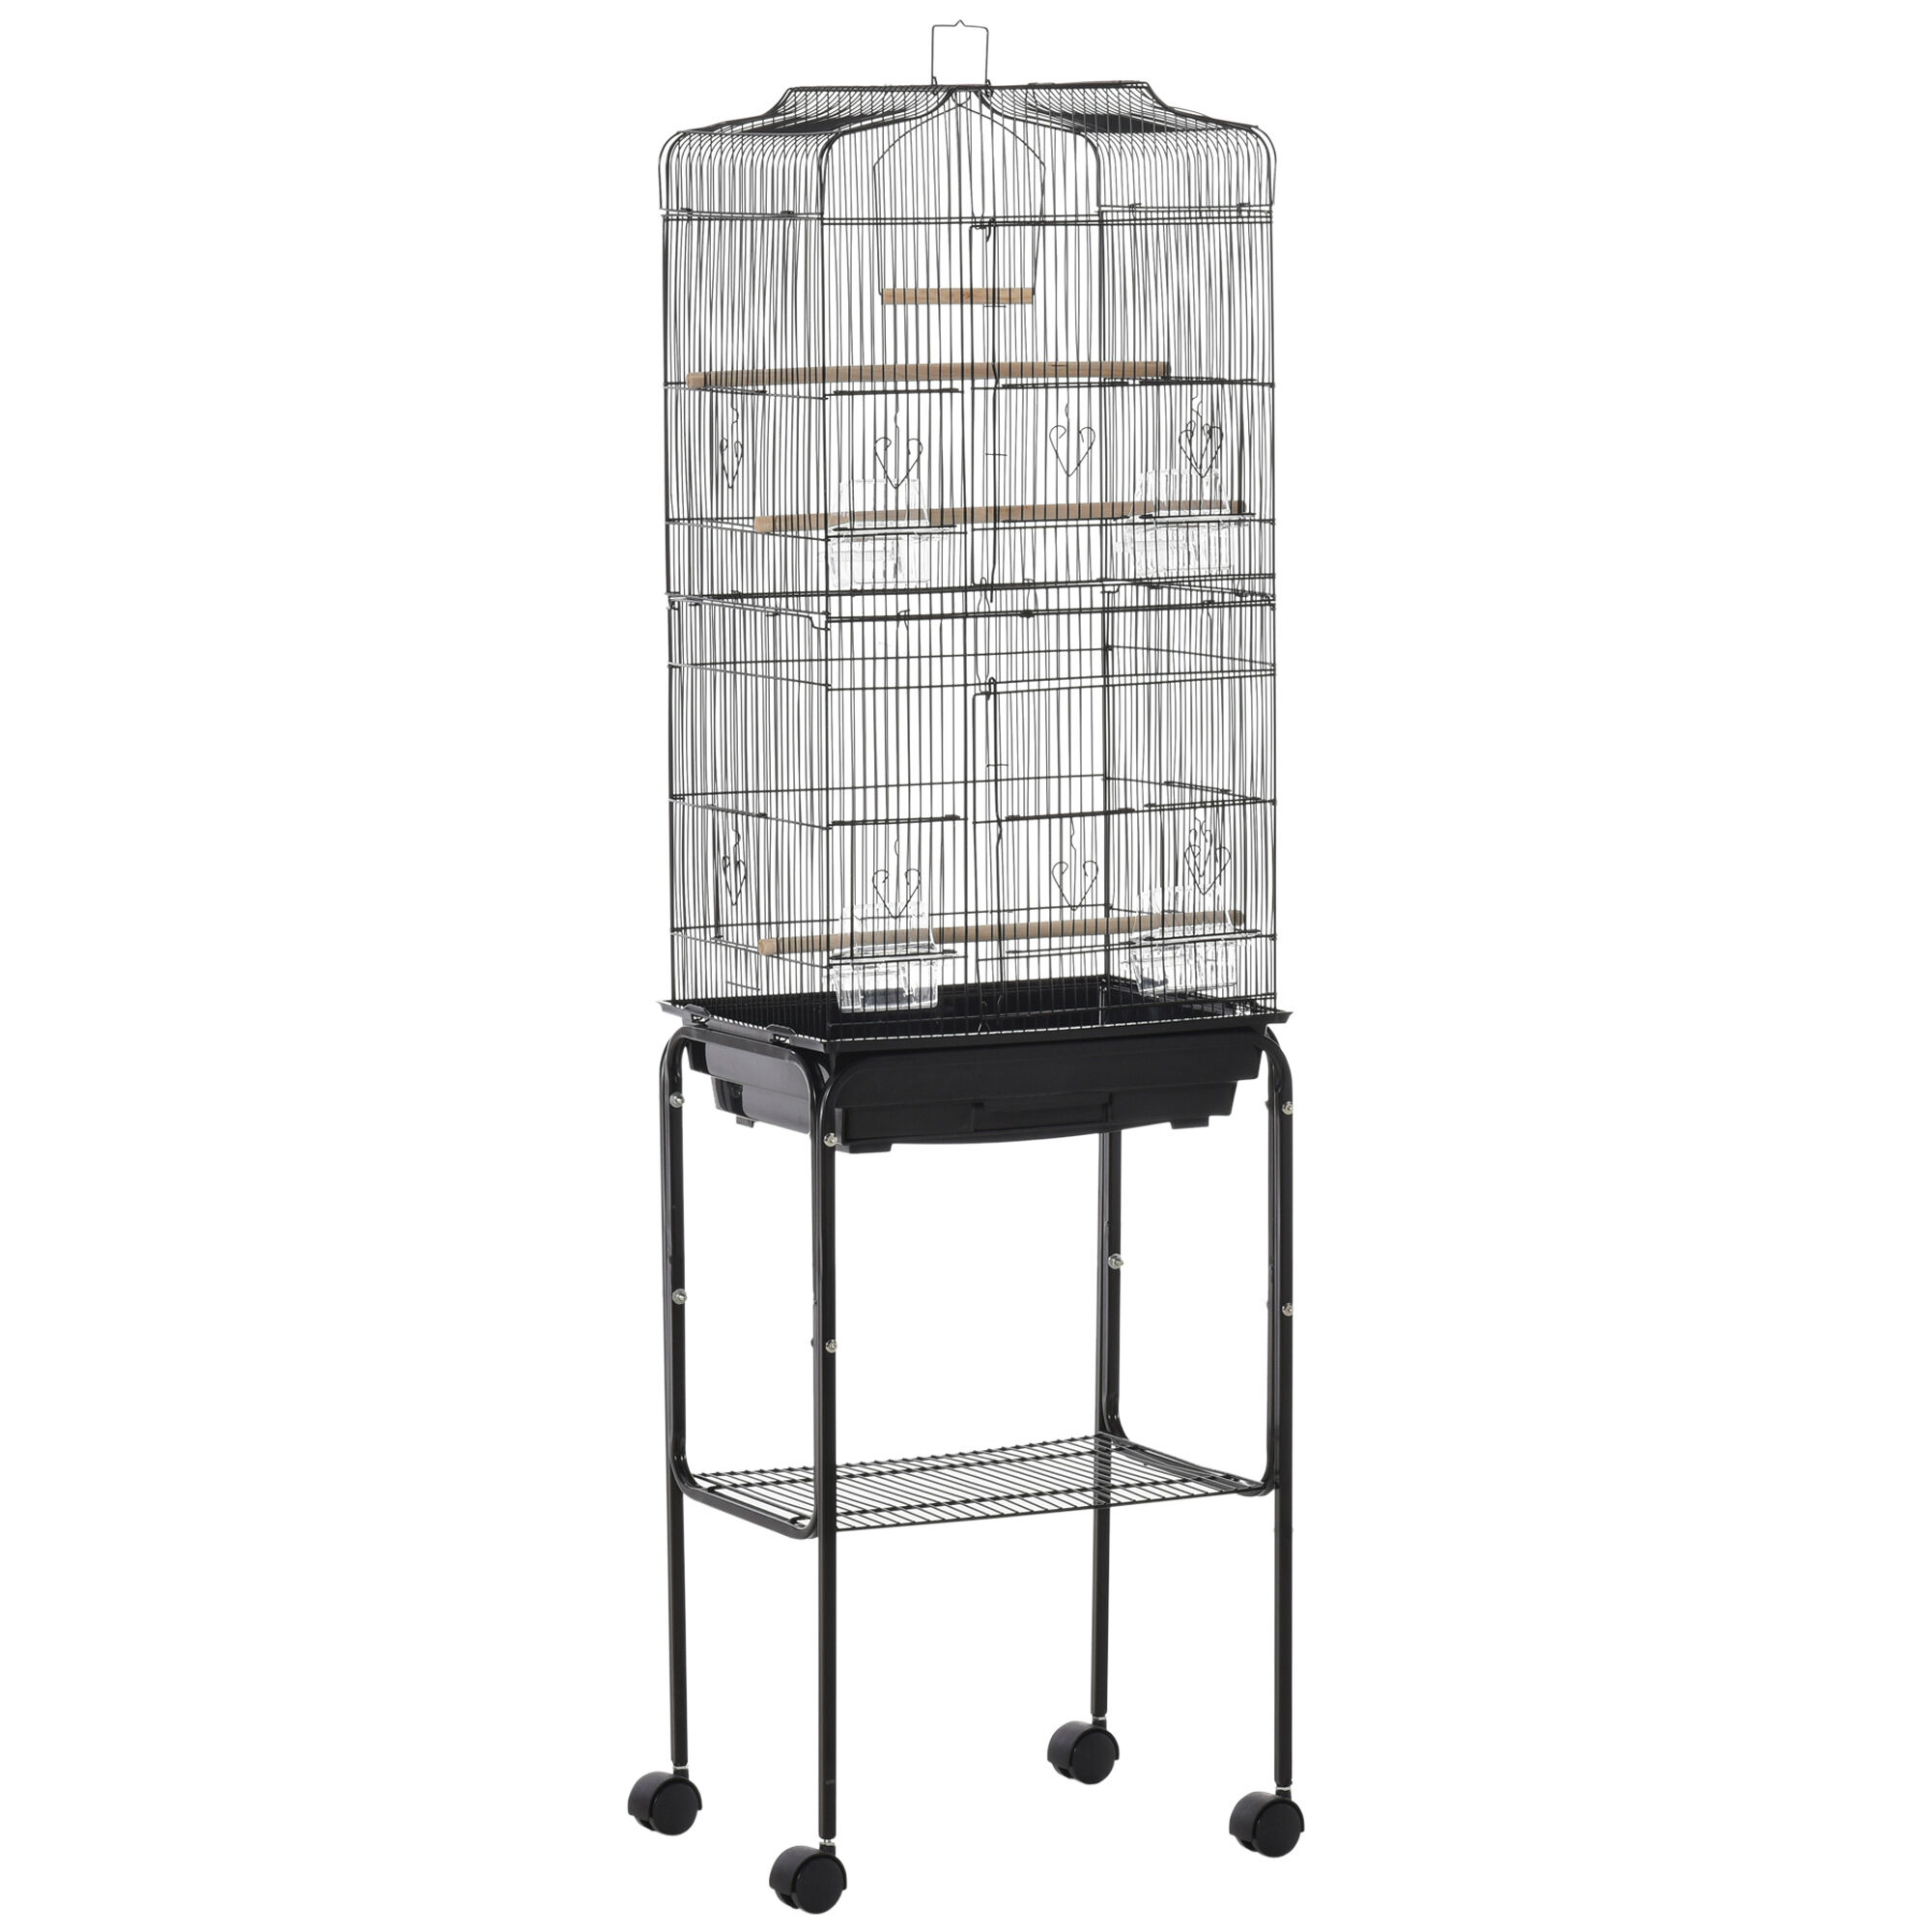 PawHut 62 Metal Bird Cage Kit with Rolling Stand Storage Basket & Accessories Black   Aosom.com